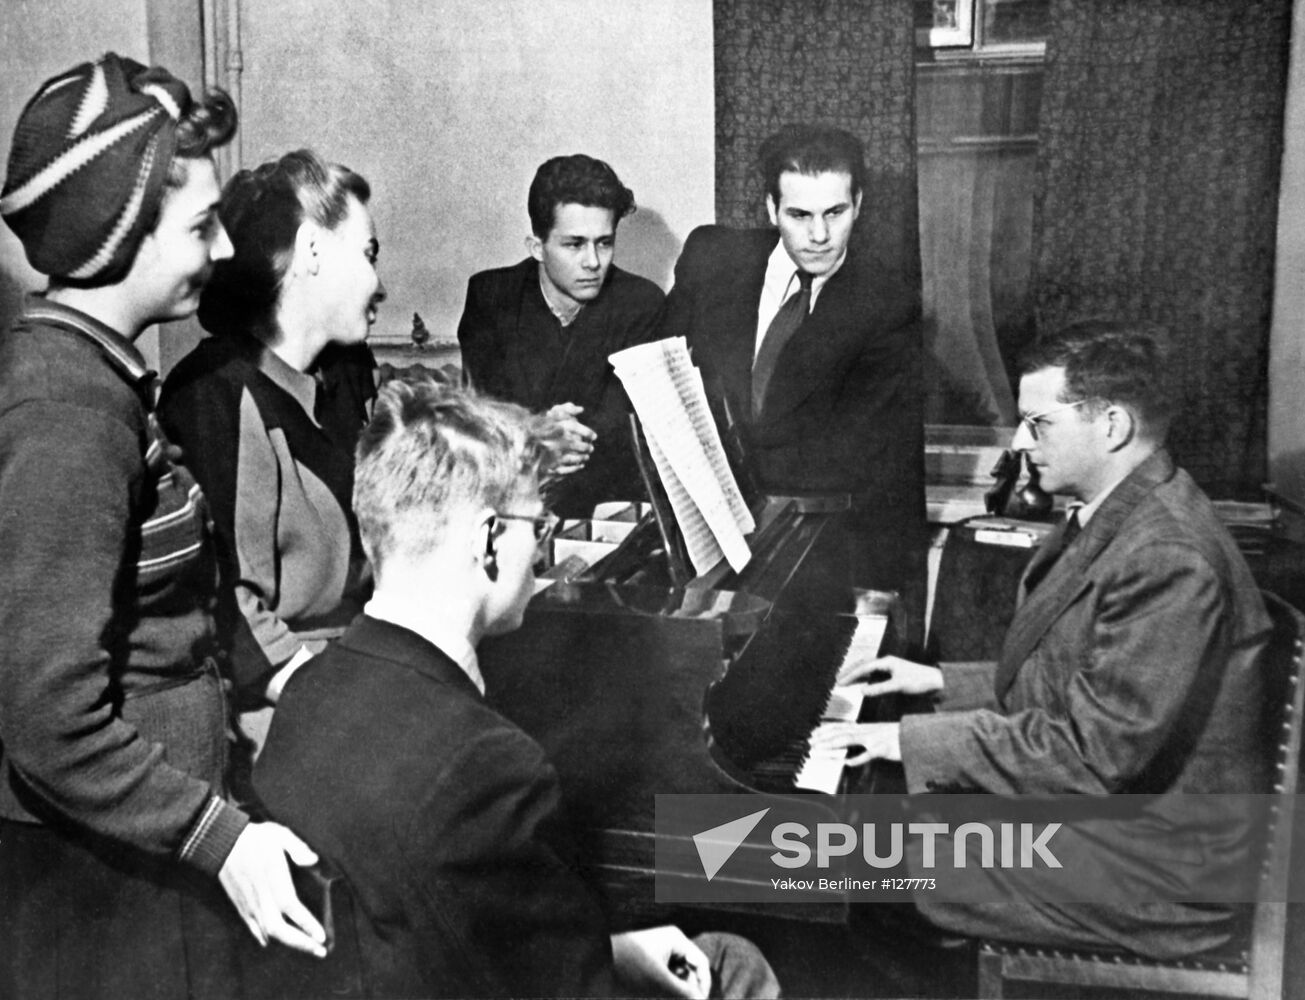 Composer Shostakovich at the classes